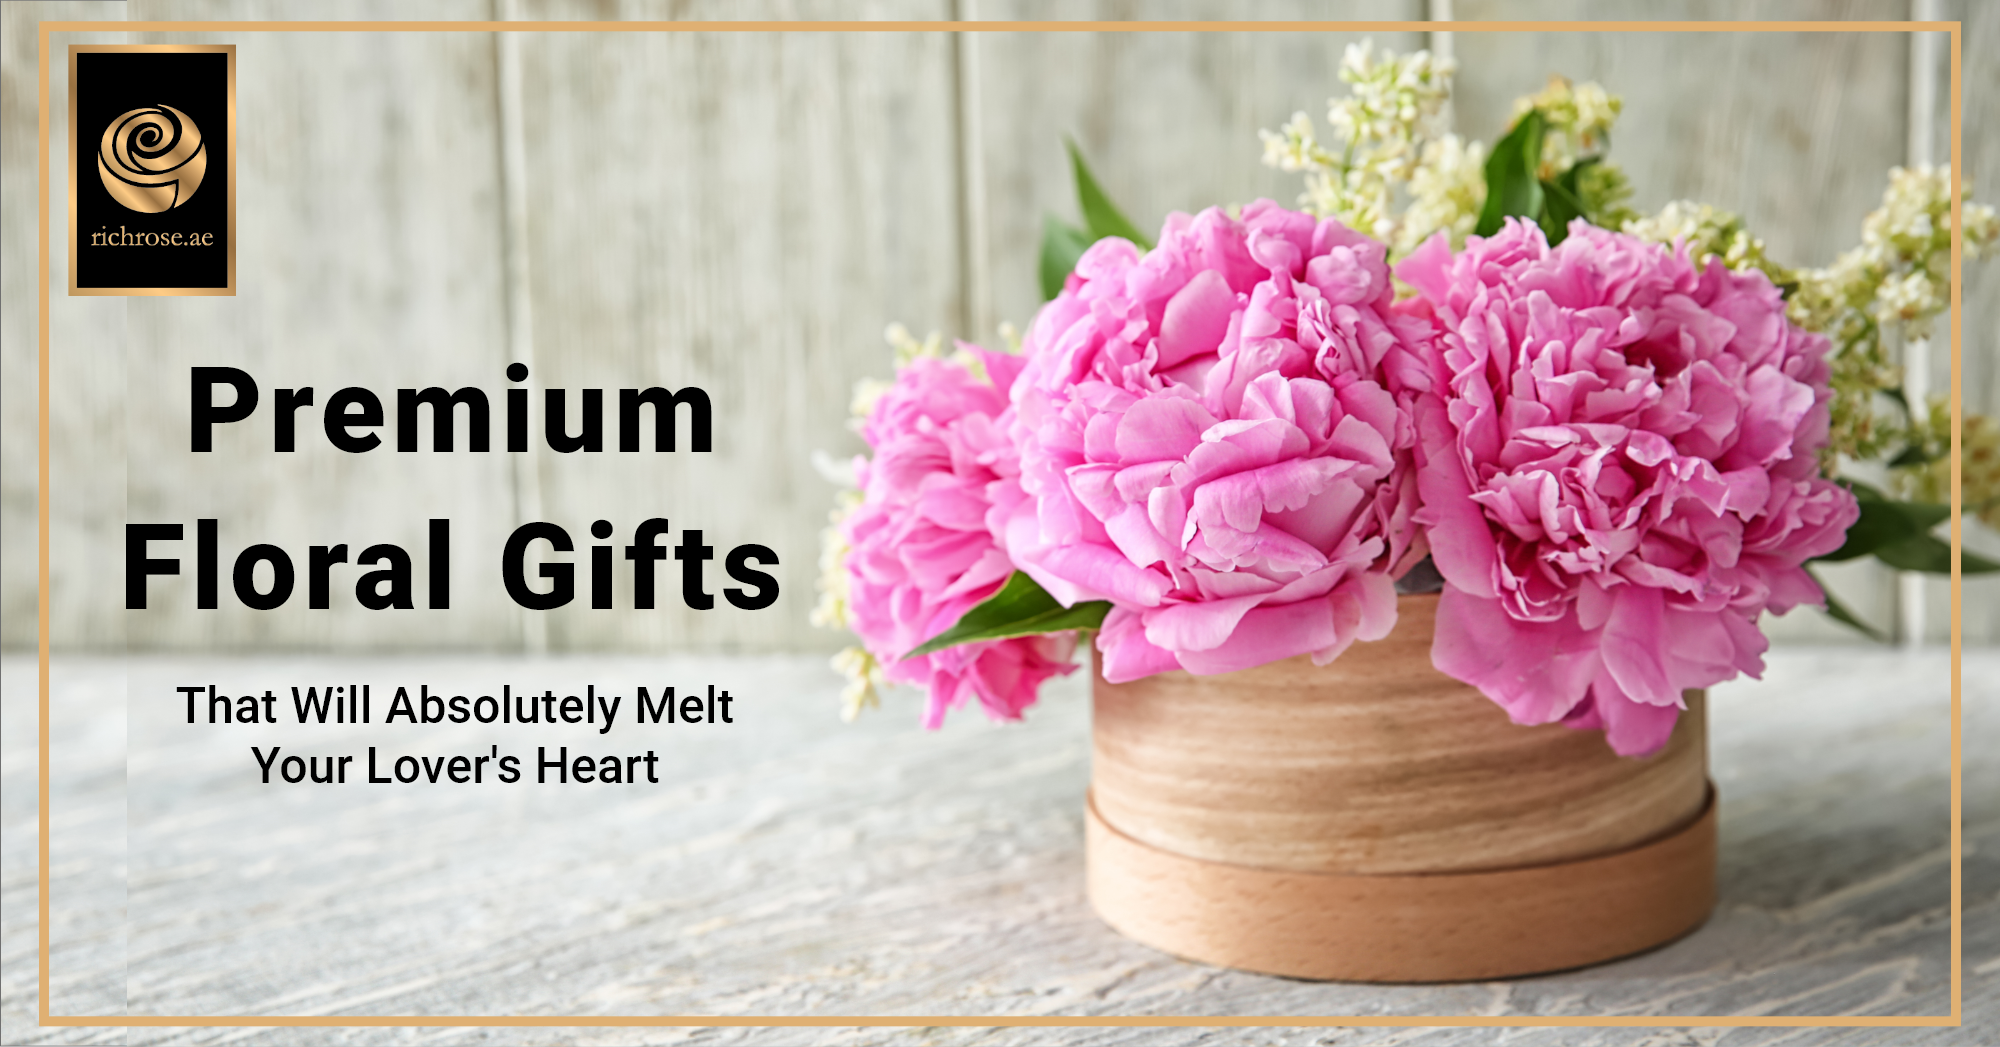 Premium Floral Gifts That Will Absolutely Melt Your Lover's Heart